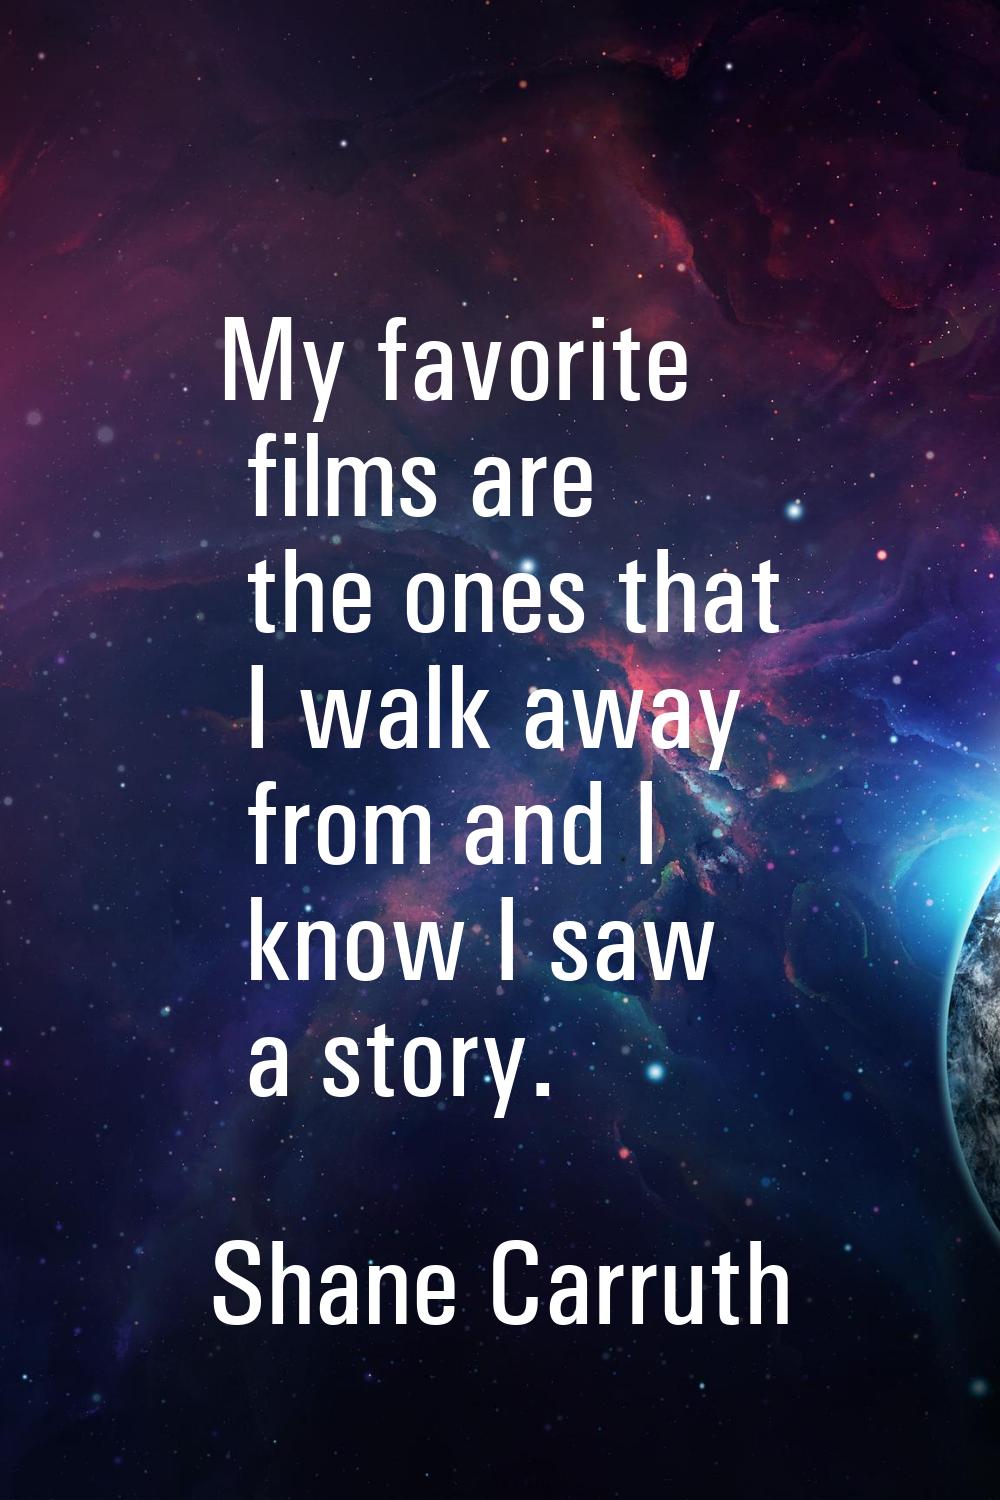 My favorite films are the ones that I walk away from and I know I saw a story.